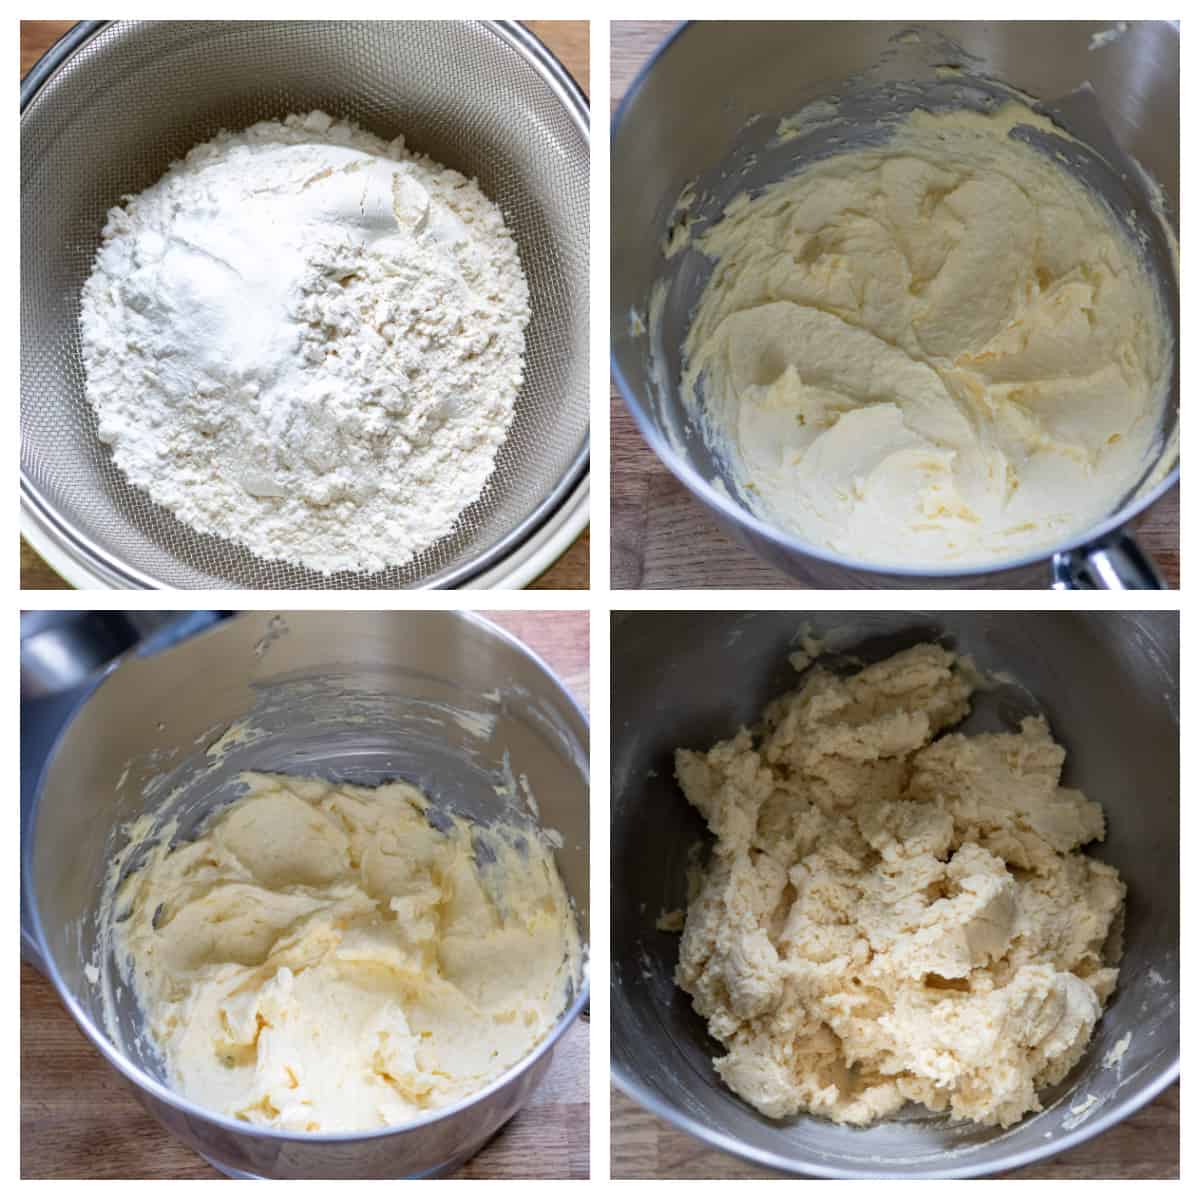 Stages of mixing the cookie dough.